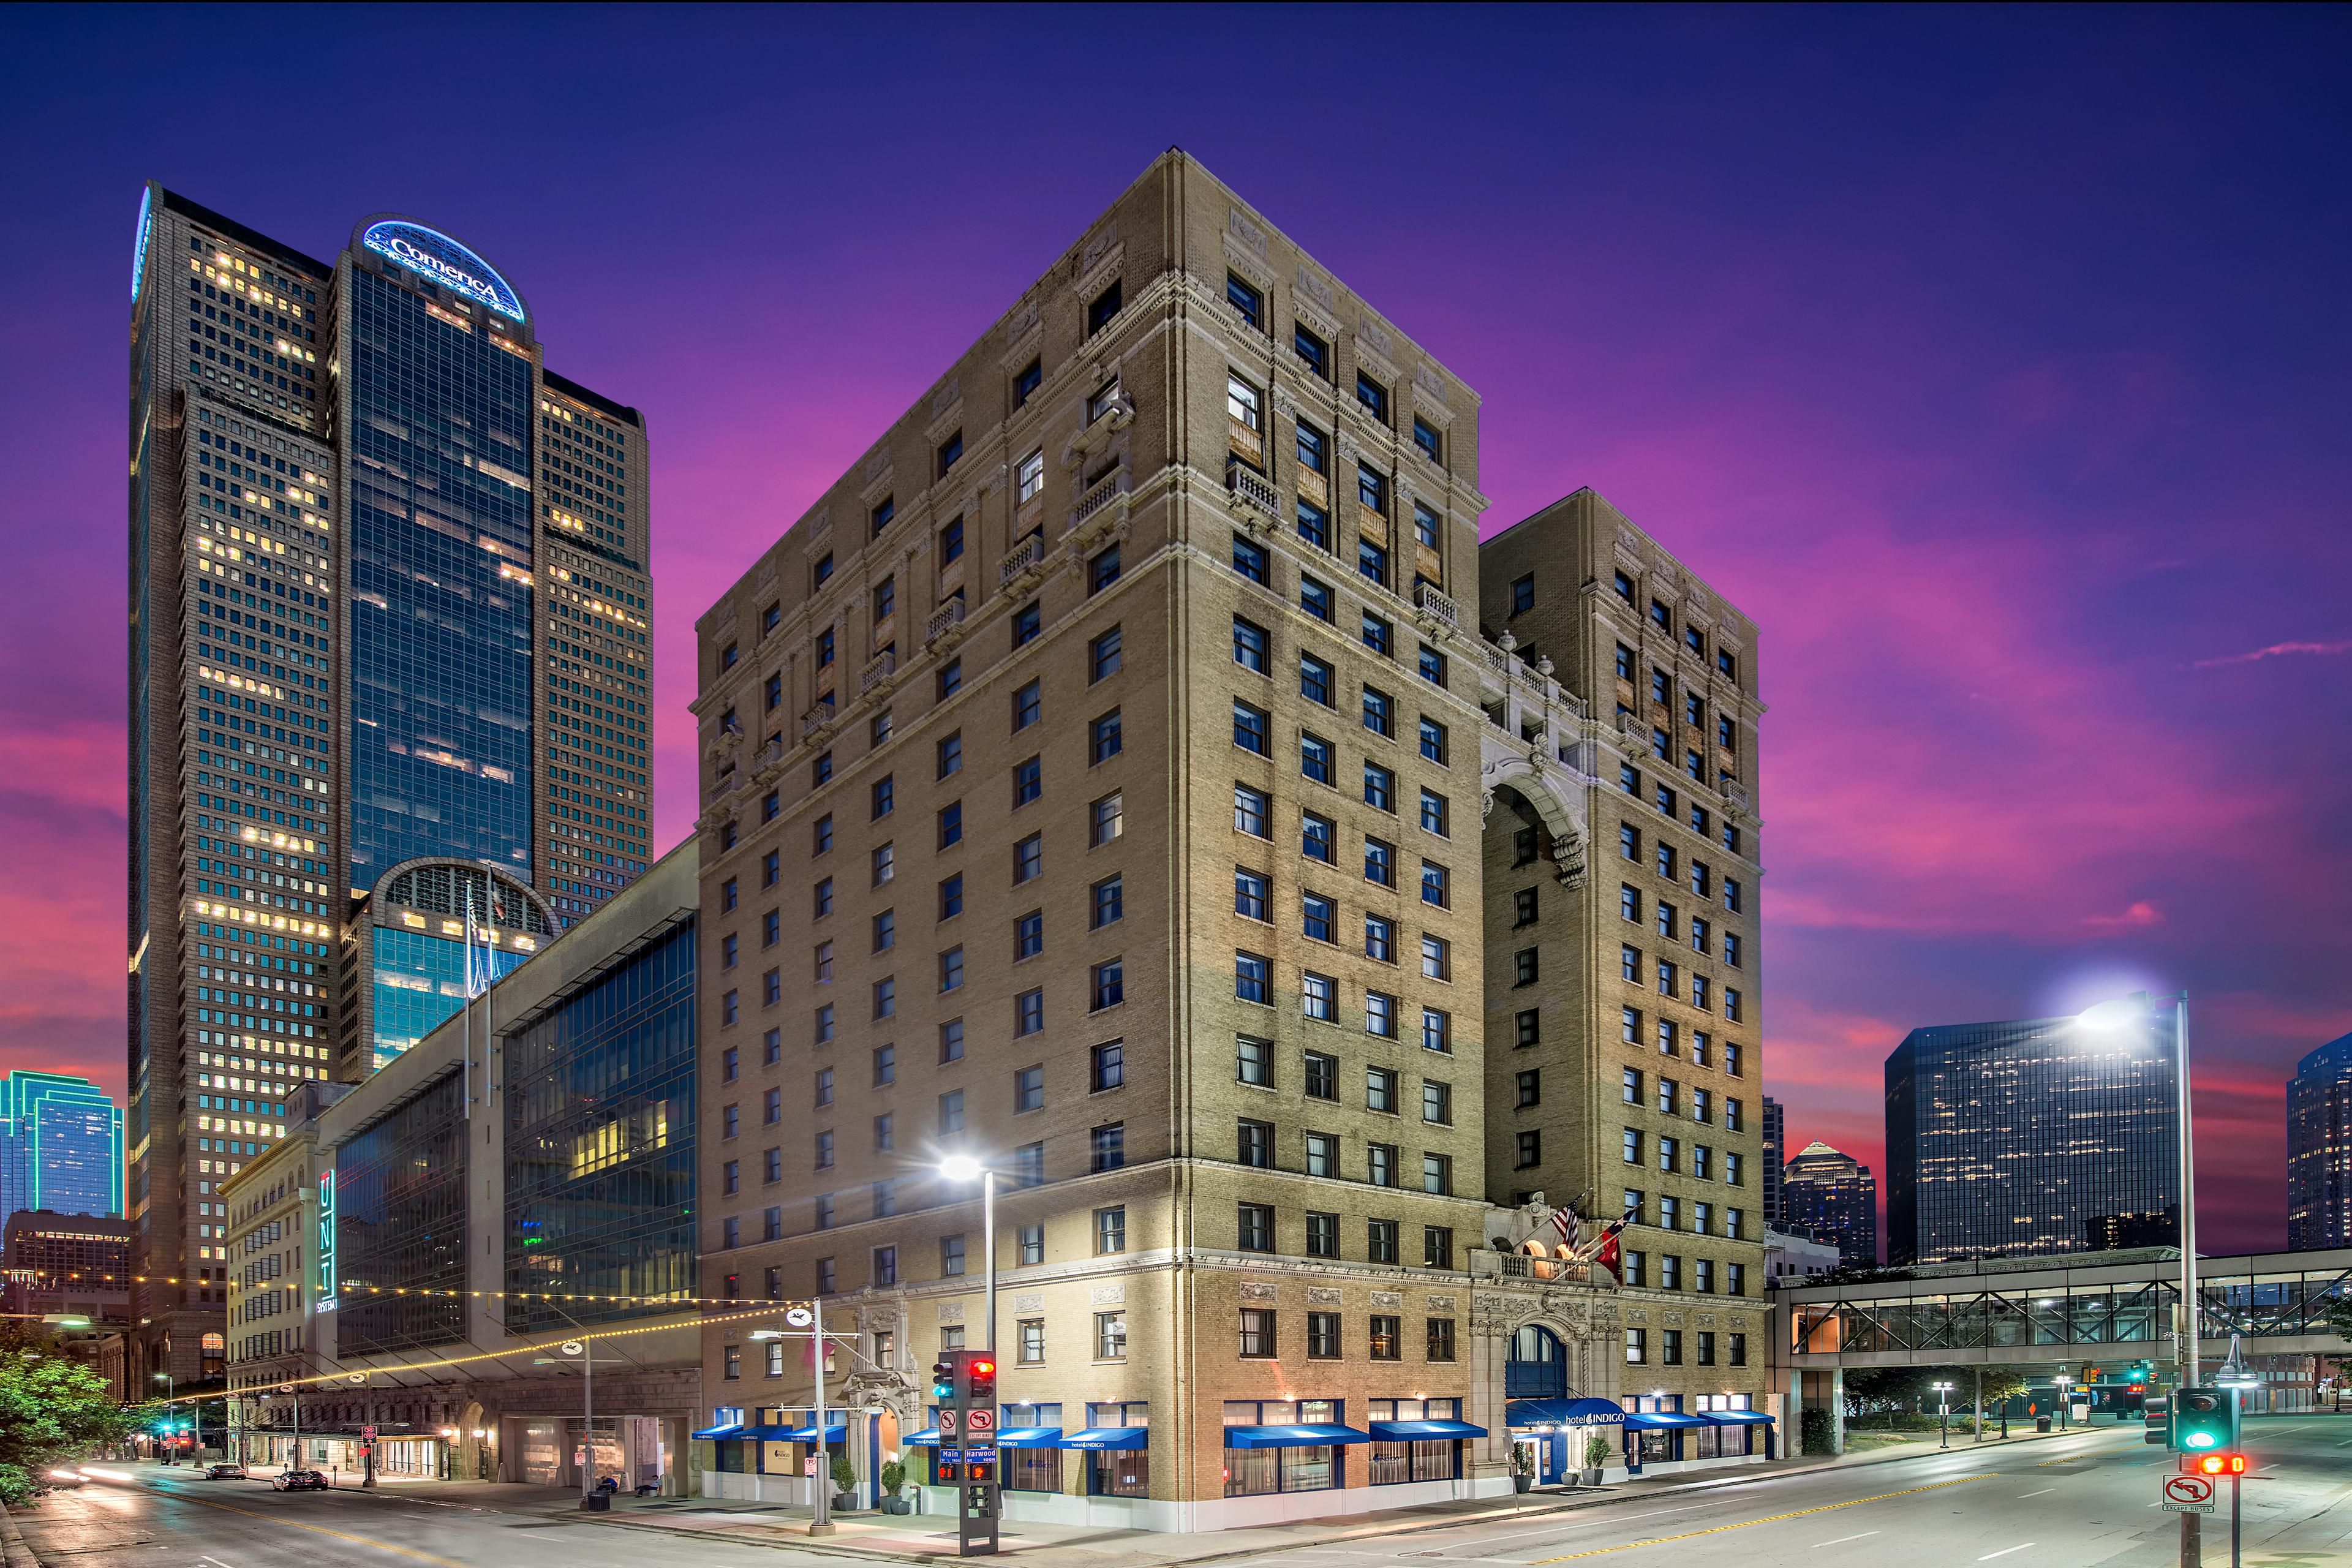 Located in the heart of the Main Street district, our downtown Dallas hotel puts you steps from exciting attractions, museums, sports venues, restaurants, entertainment, and shopping. Stay near Dos Equis Pavilion, Deep Ellum, American Airlines Center, the Dallas Arts District, and the city's major corporations.